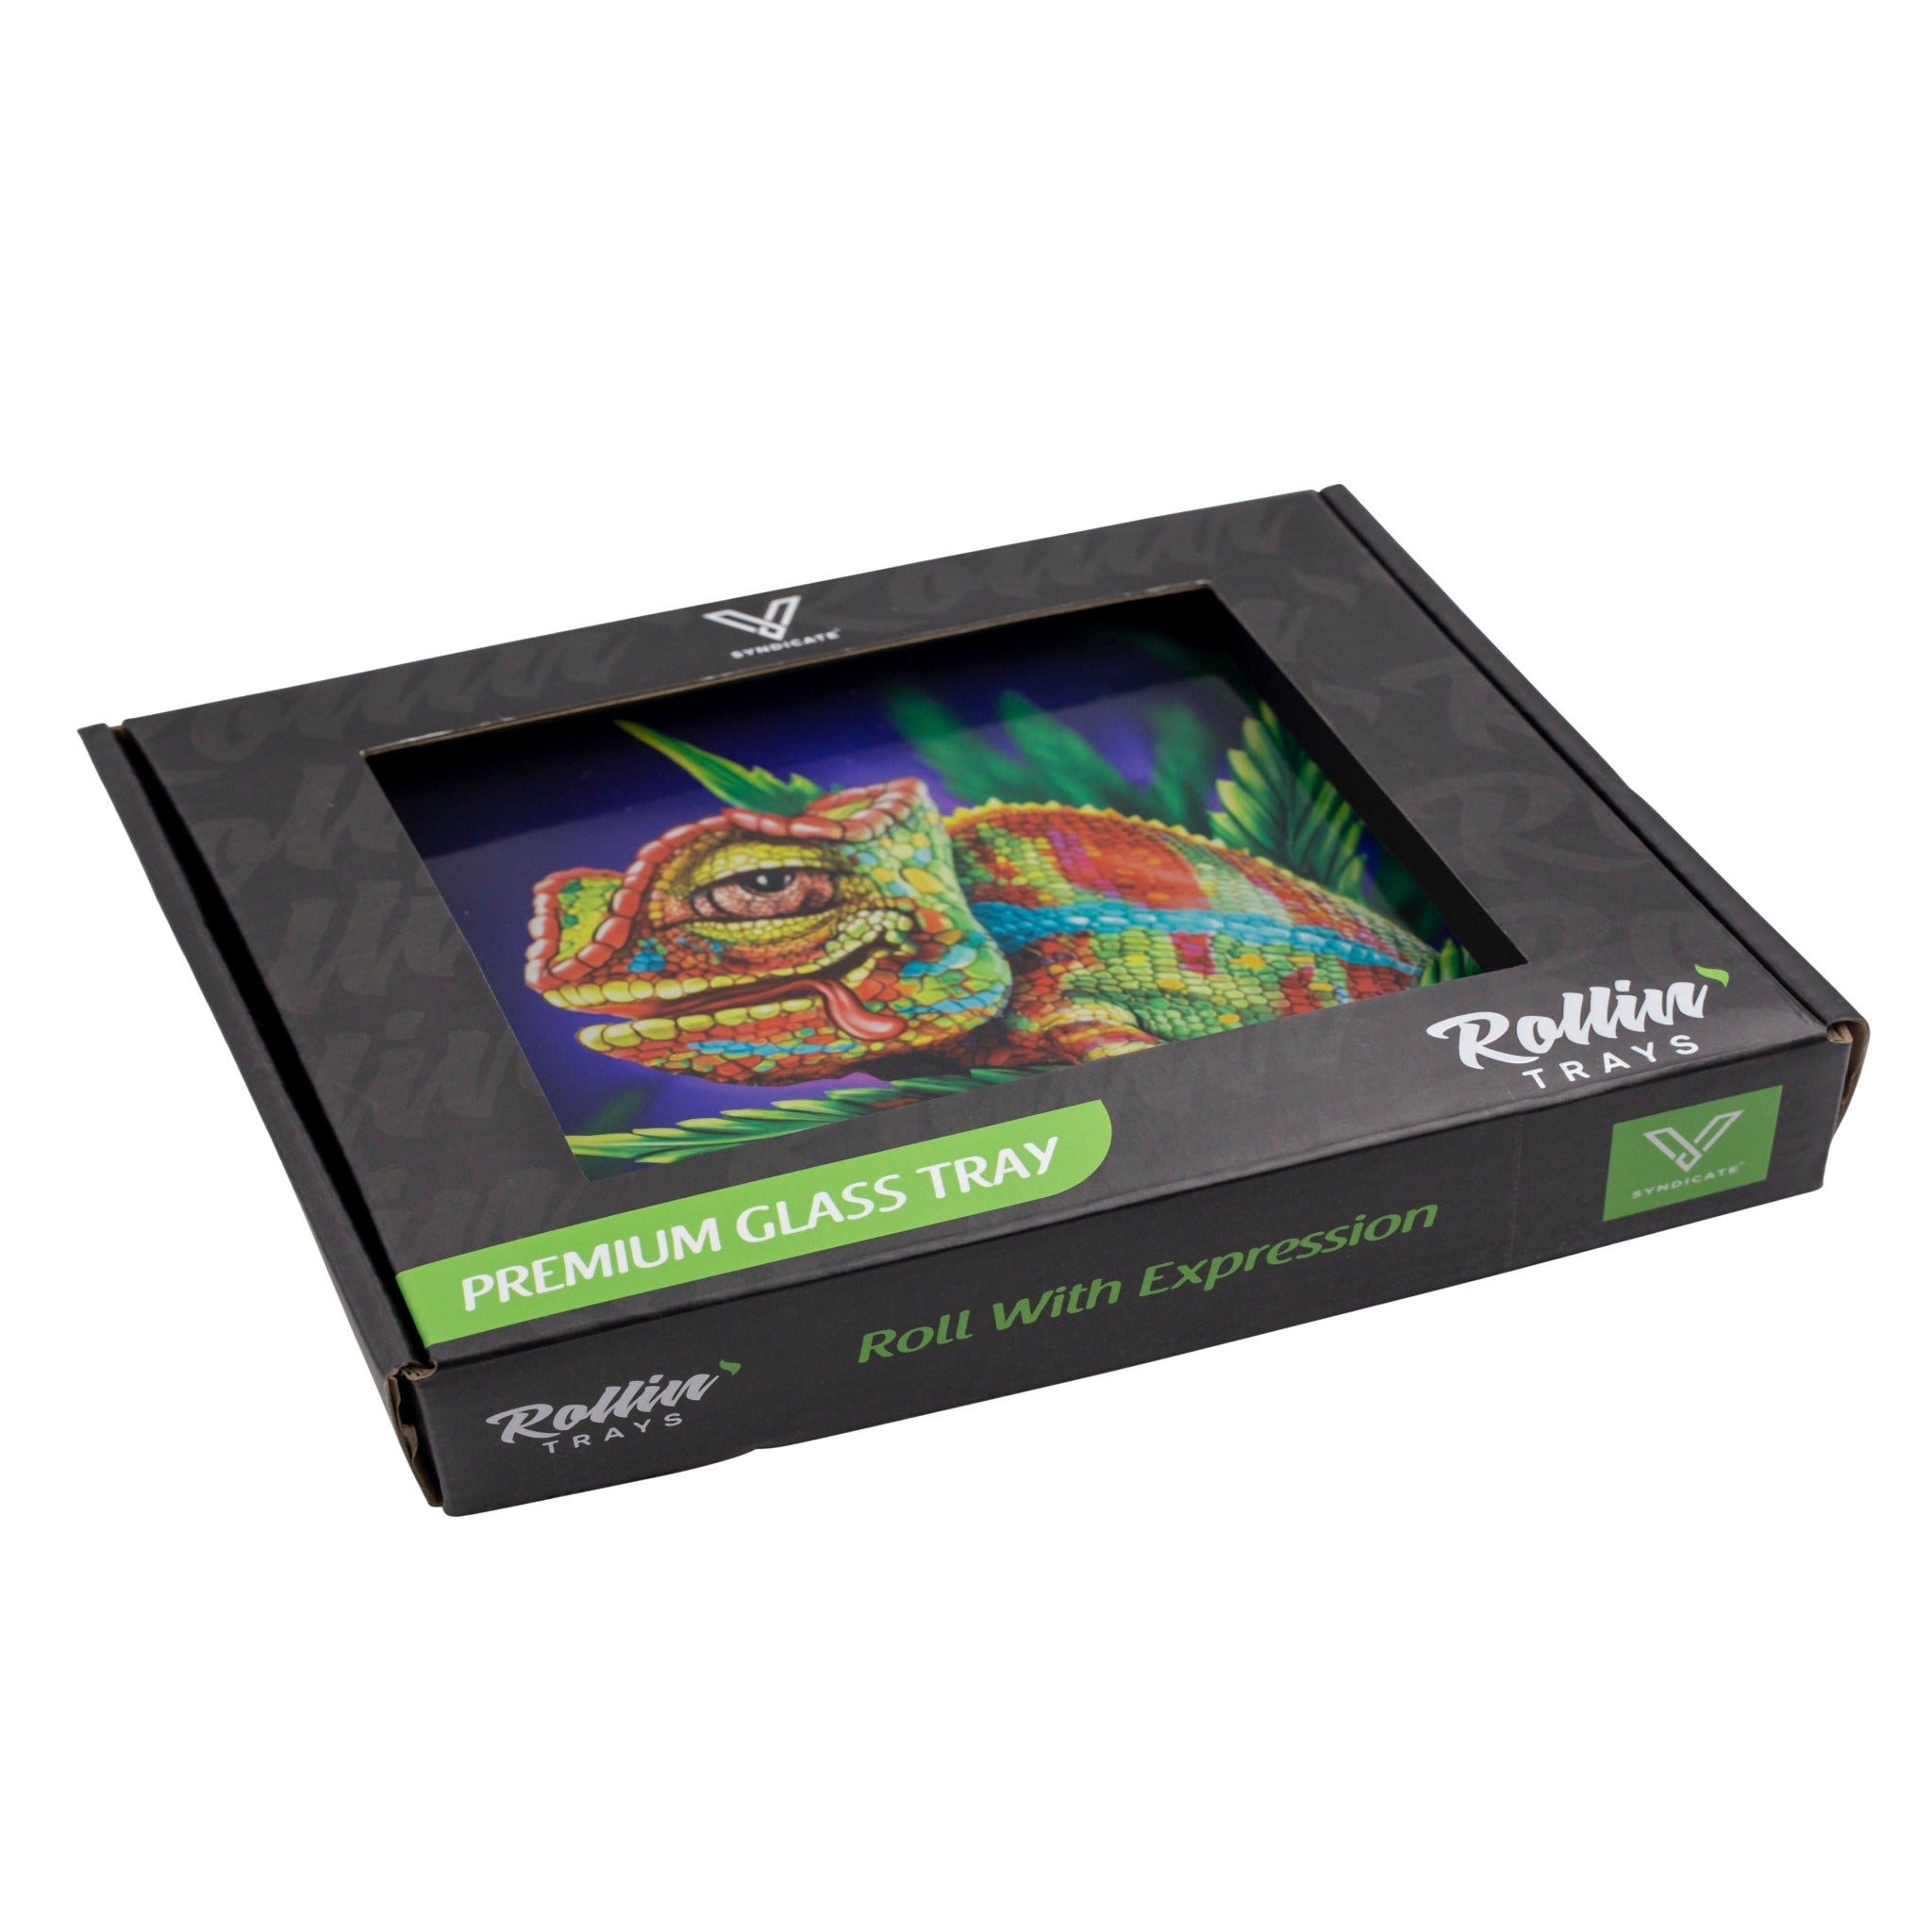 V Syndicate Cloud 9 Chameleon Glass Rolling Tray Rolling Tray VS 